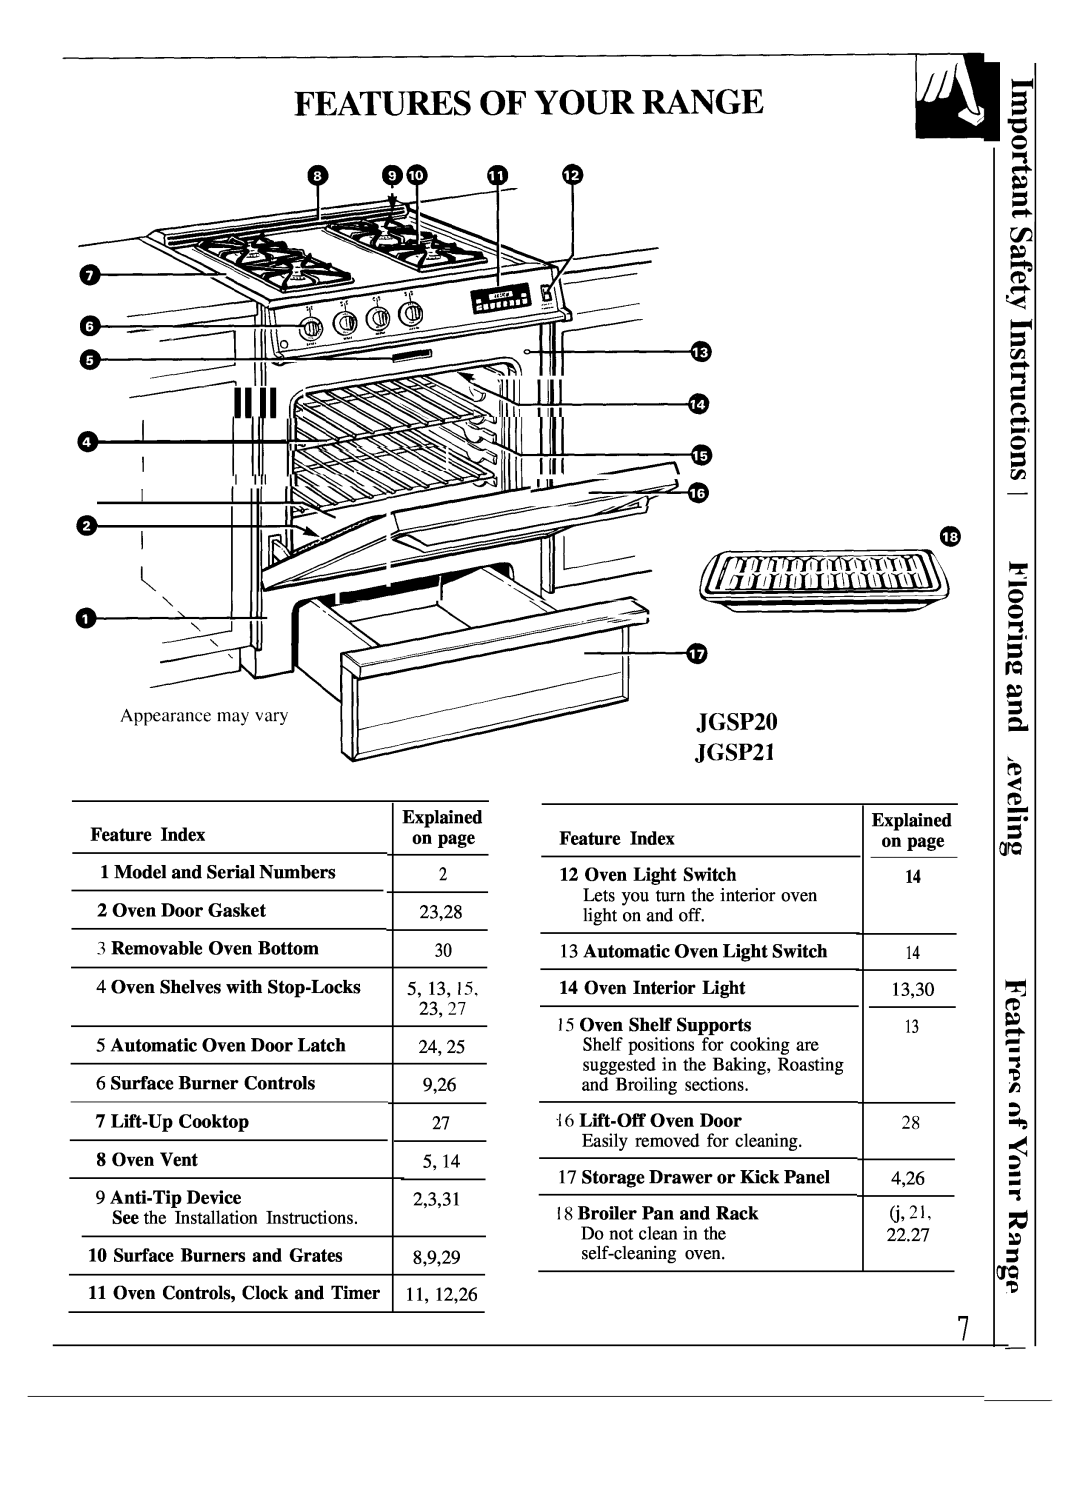 GE JGSP20 JGSP21, Ii ‘ E, Feature Index, Explained, on page, Model and Serial Numbers, Oven Door Gasket, 23,28, 5, 13 